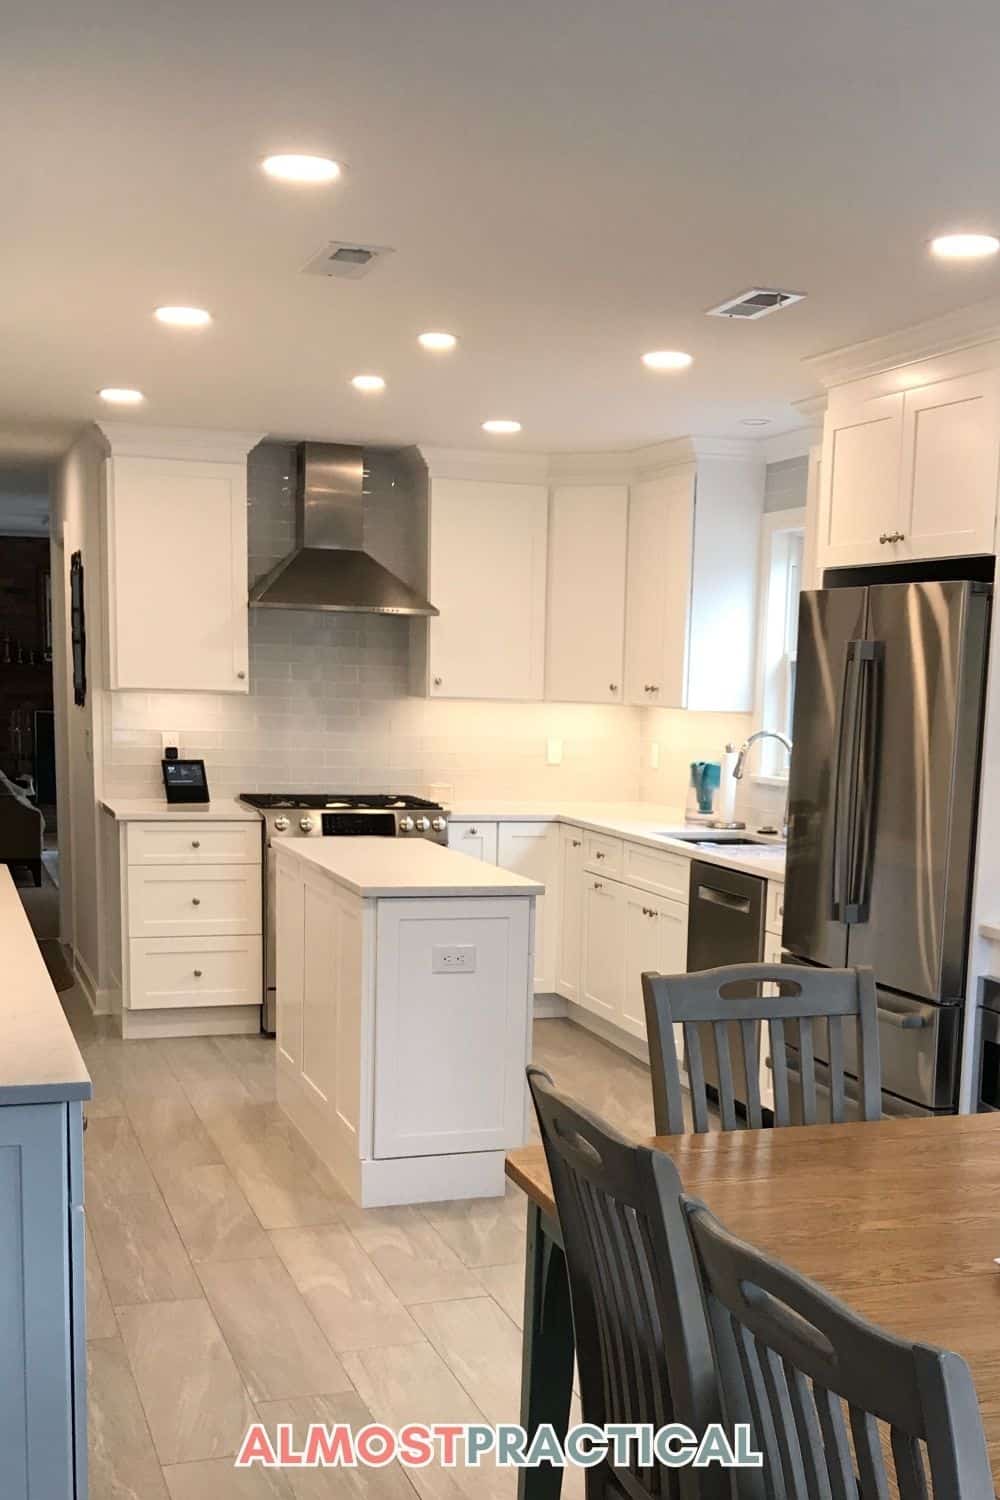 The Recessed Lighting I Chose In My Kitchen Remodel